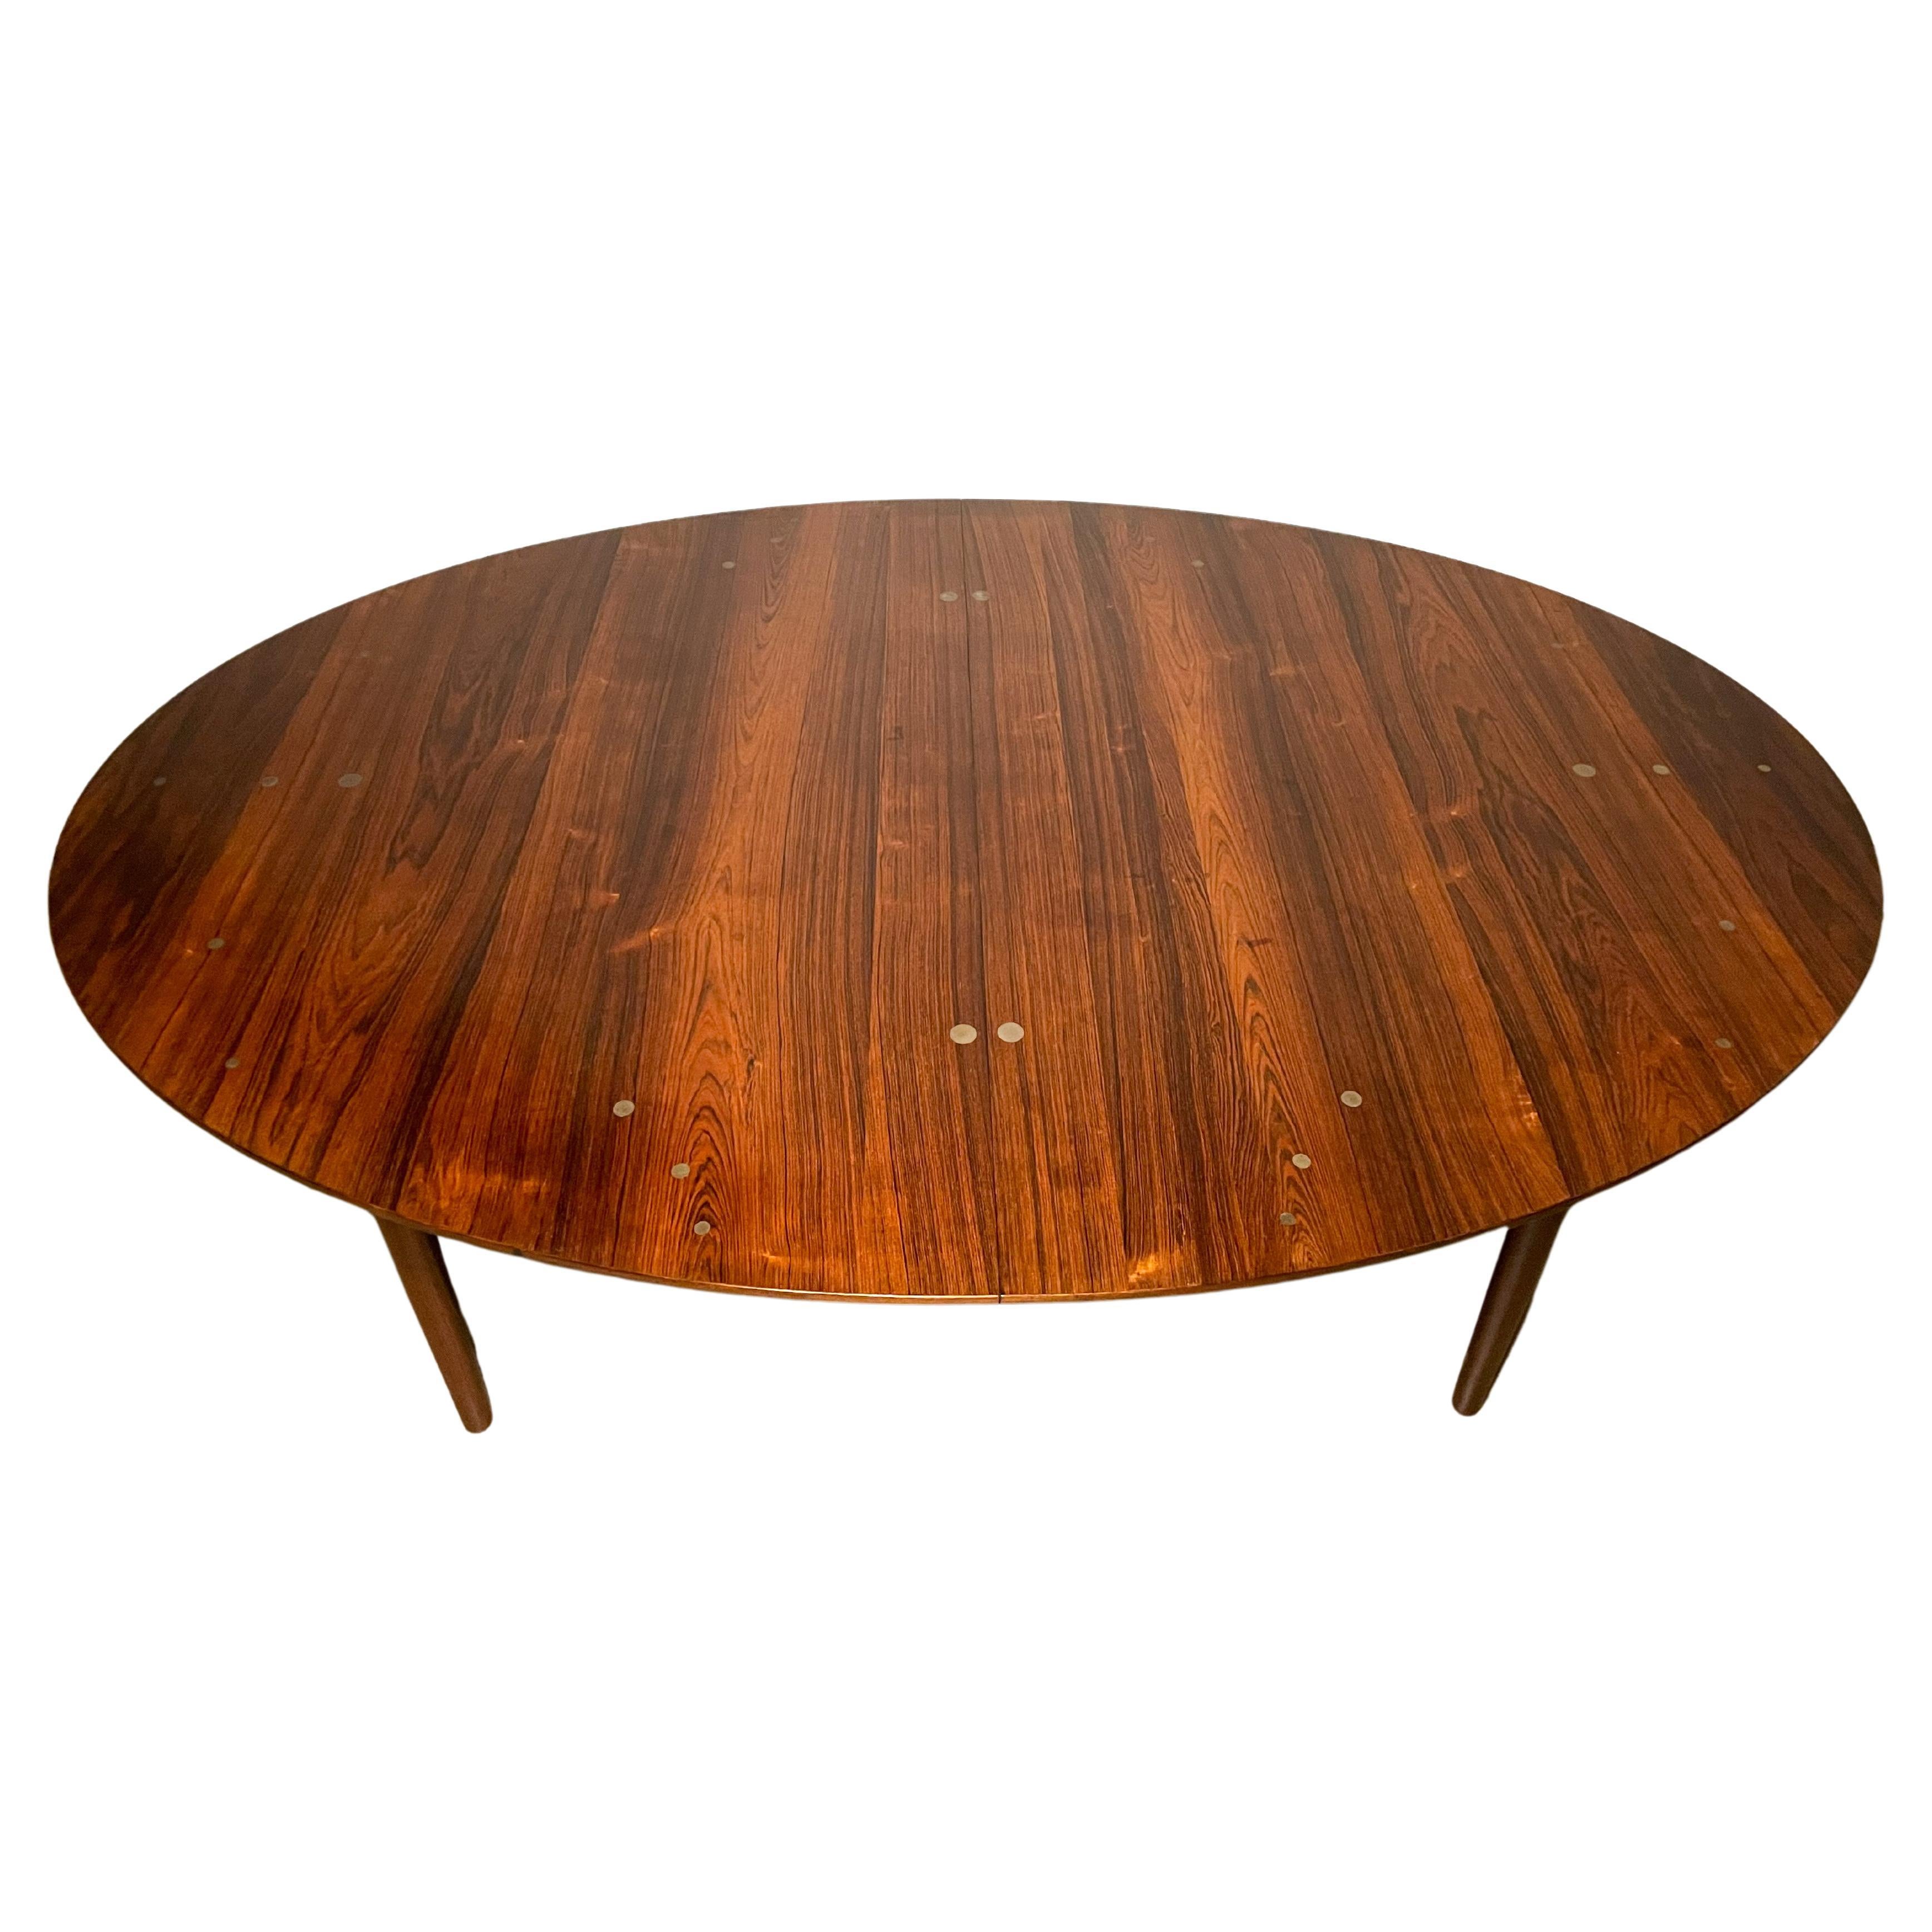 Breathtakingly beautiful Brazilian Rosewood dining table with Silver inlay designed by Finn Juhl and made by master cabinetmaker Niels Vodder. Highly collectible and perhaps the pinnacle of Danish Modern dining table design.

The table is 78